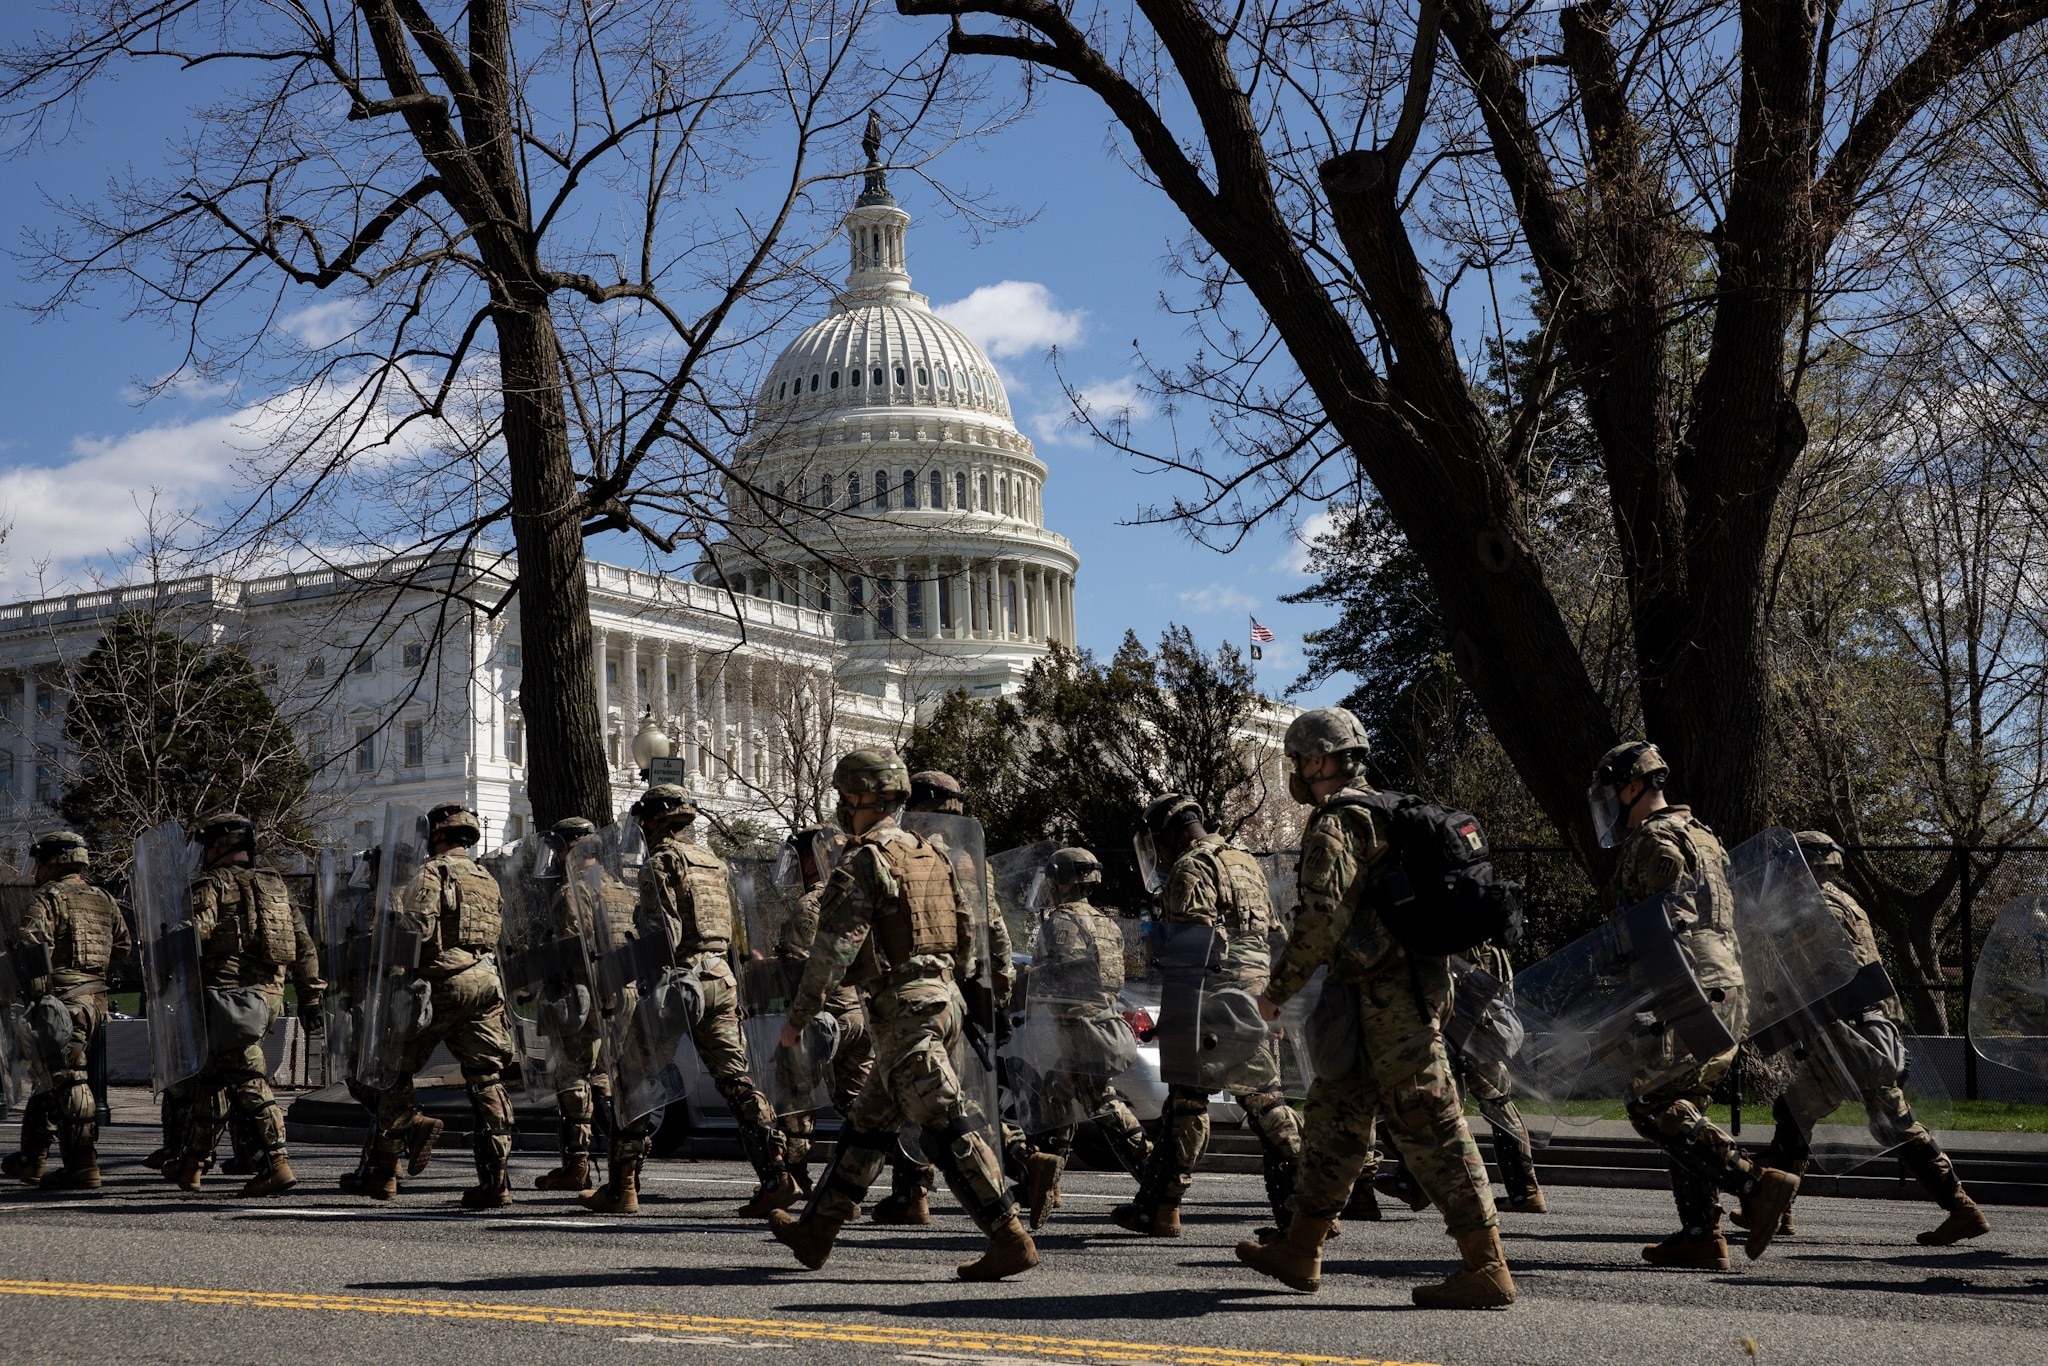 US Capitol police officers and National Guard troops walk near the scene after the attack on Friday.